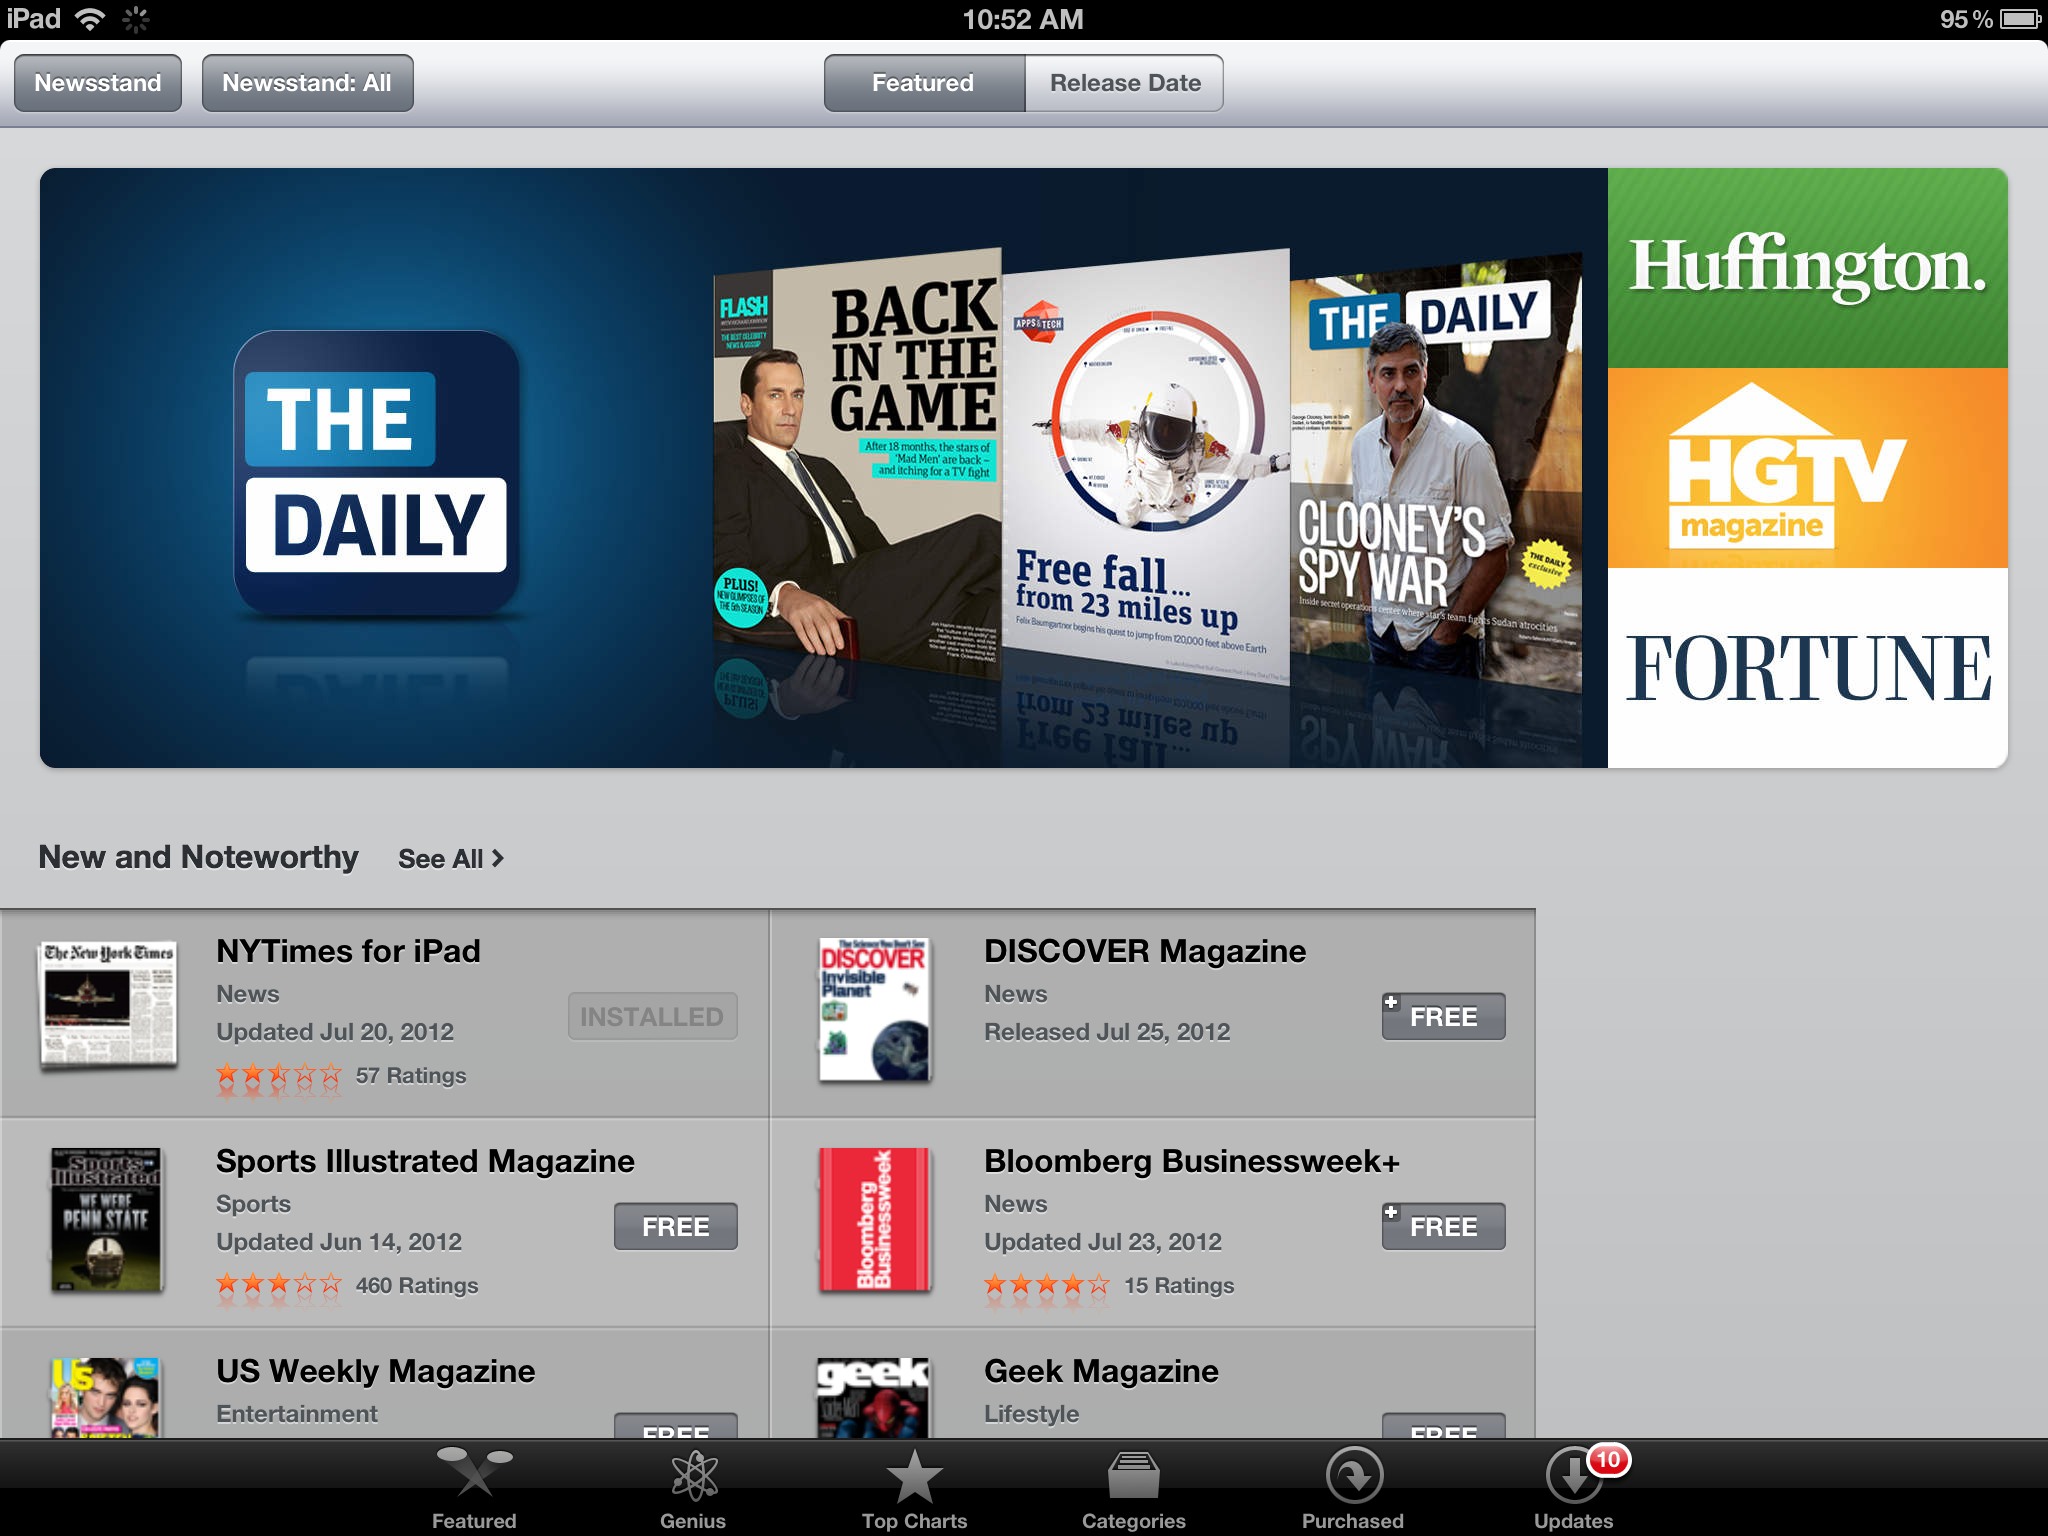 Newsstand for iPad content and pricing